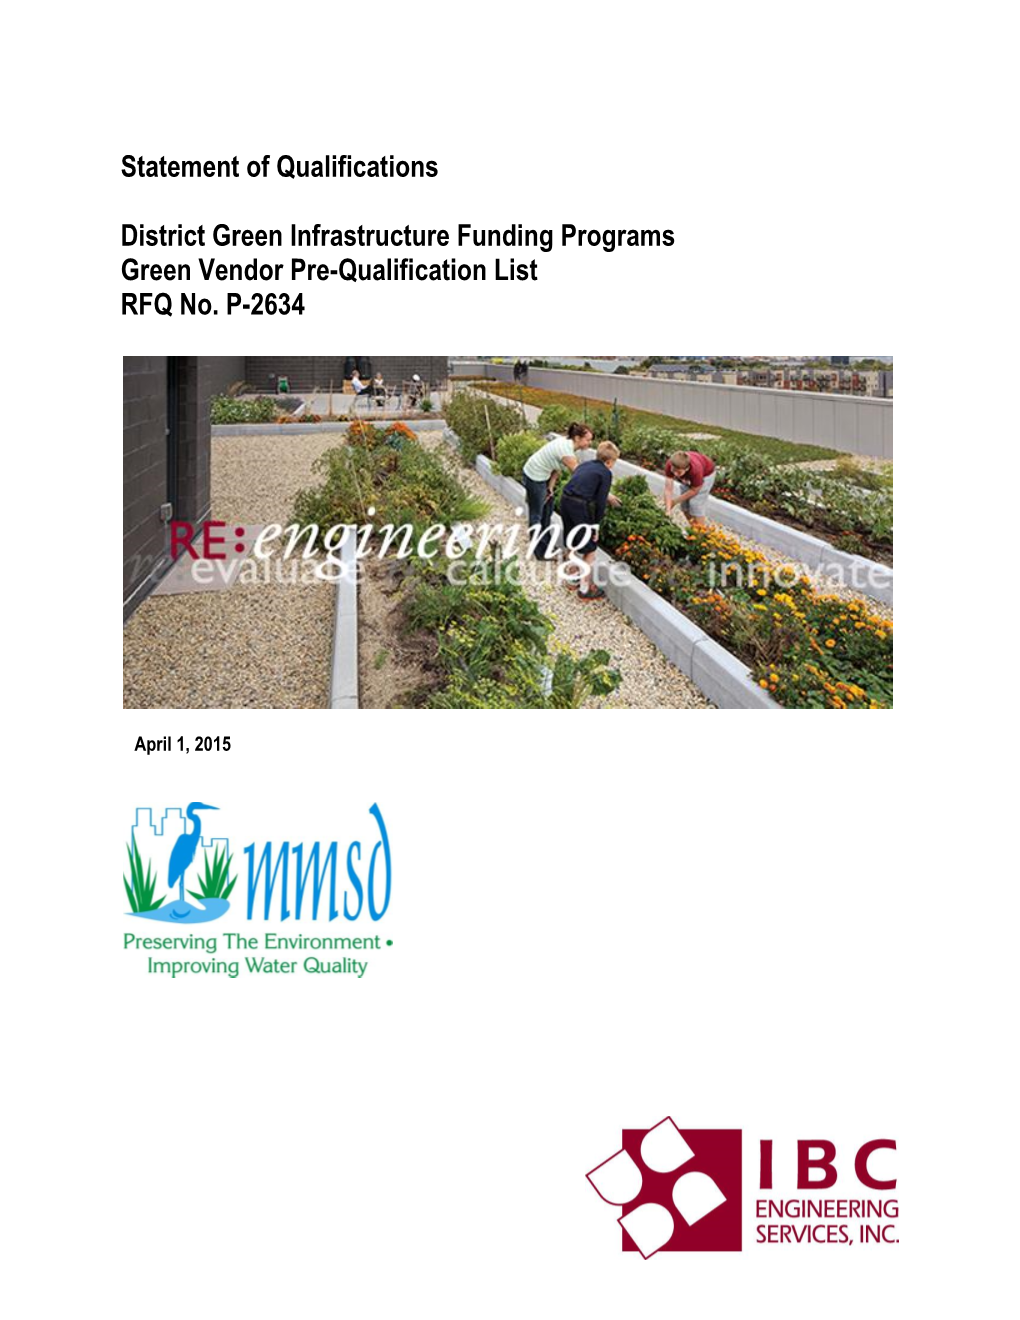 Statement of Qualifications District Green Infrastructure Funding